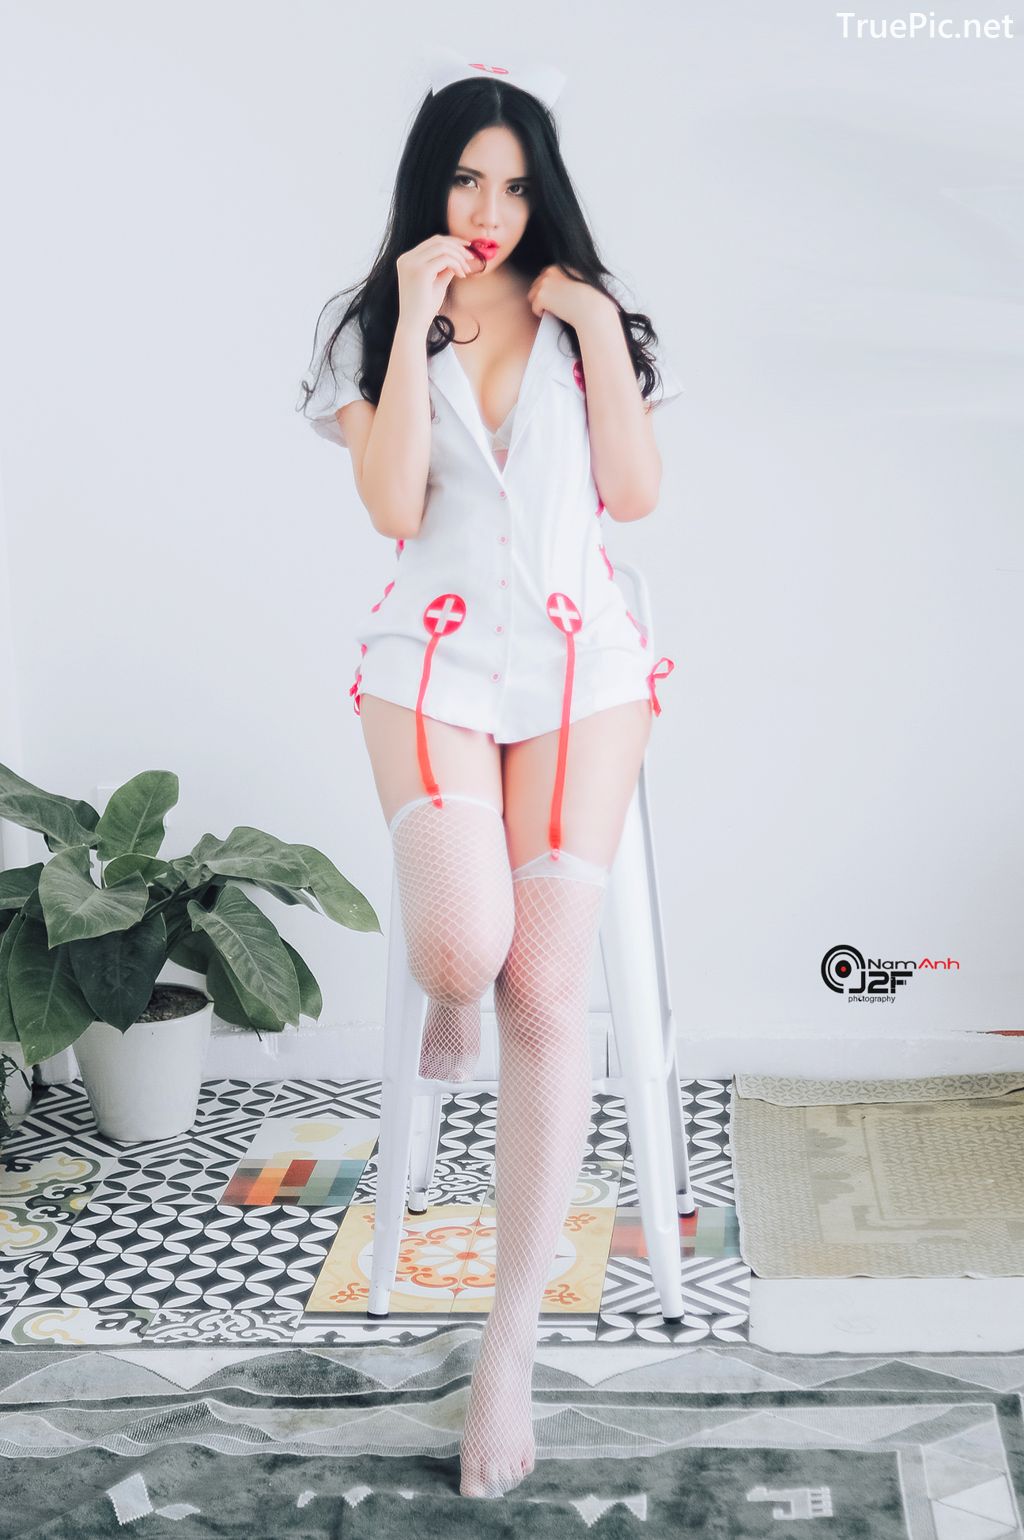 Image-Vietnamese-Model-Sexy-Beauty-of-Beautiful-Girls-Taken-by-NamAnh-Photography-4-TruePic.net- Picture-11